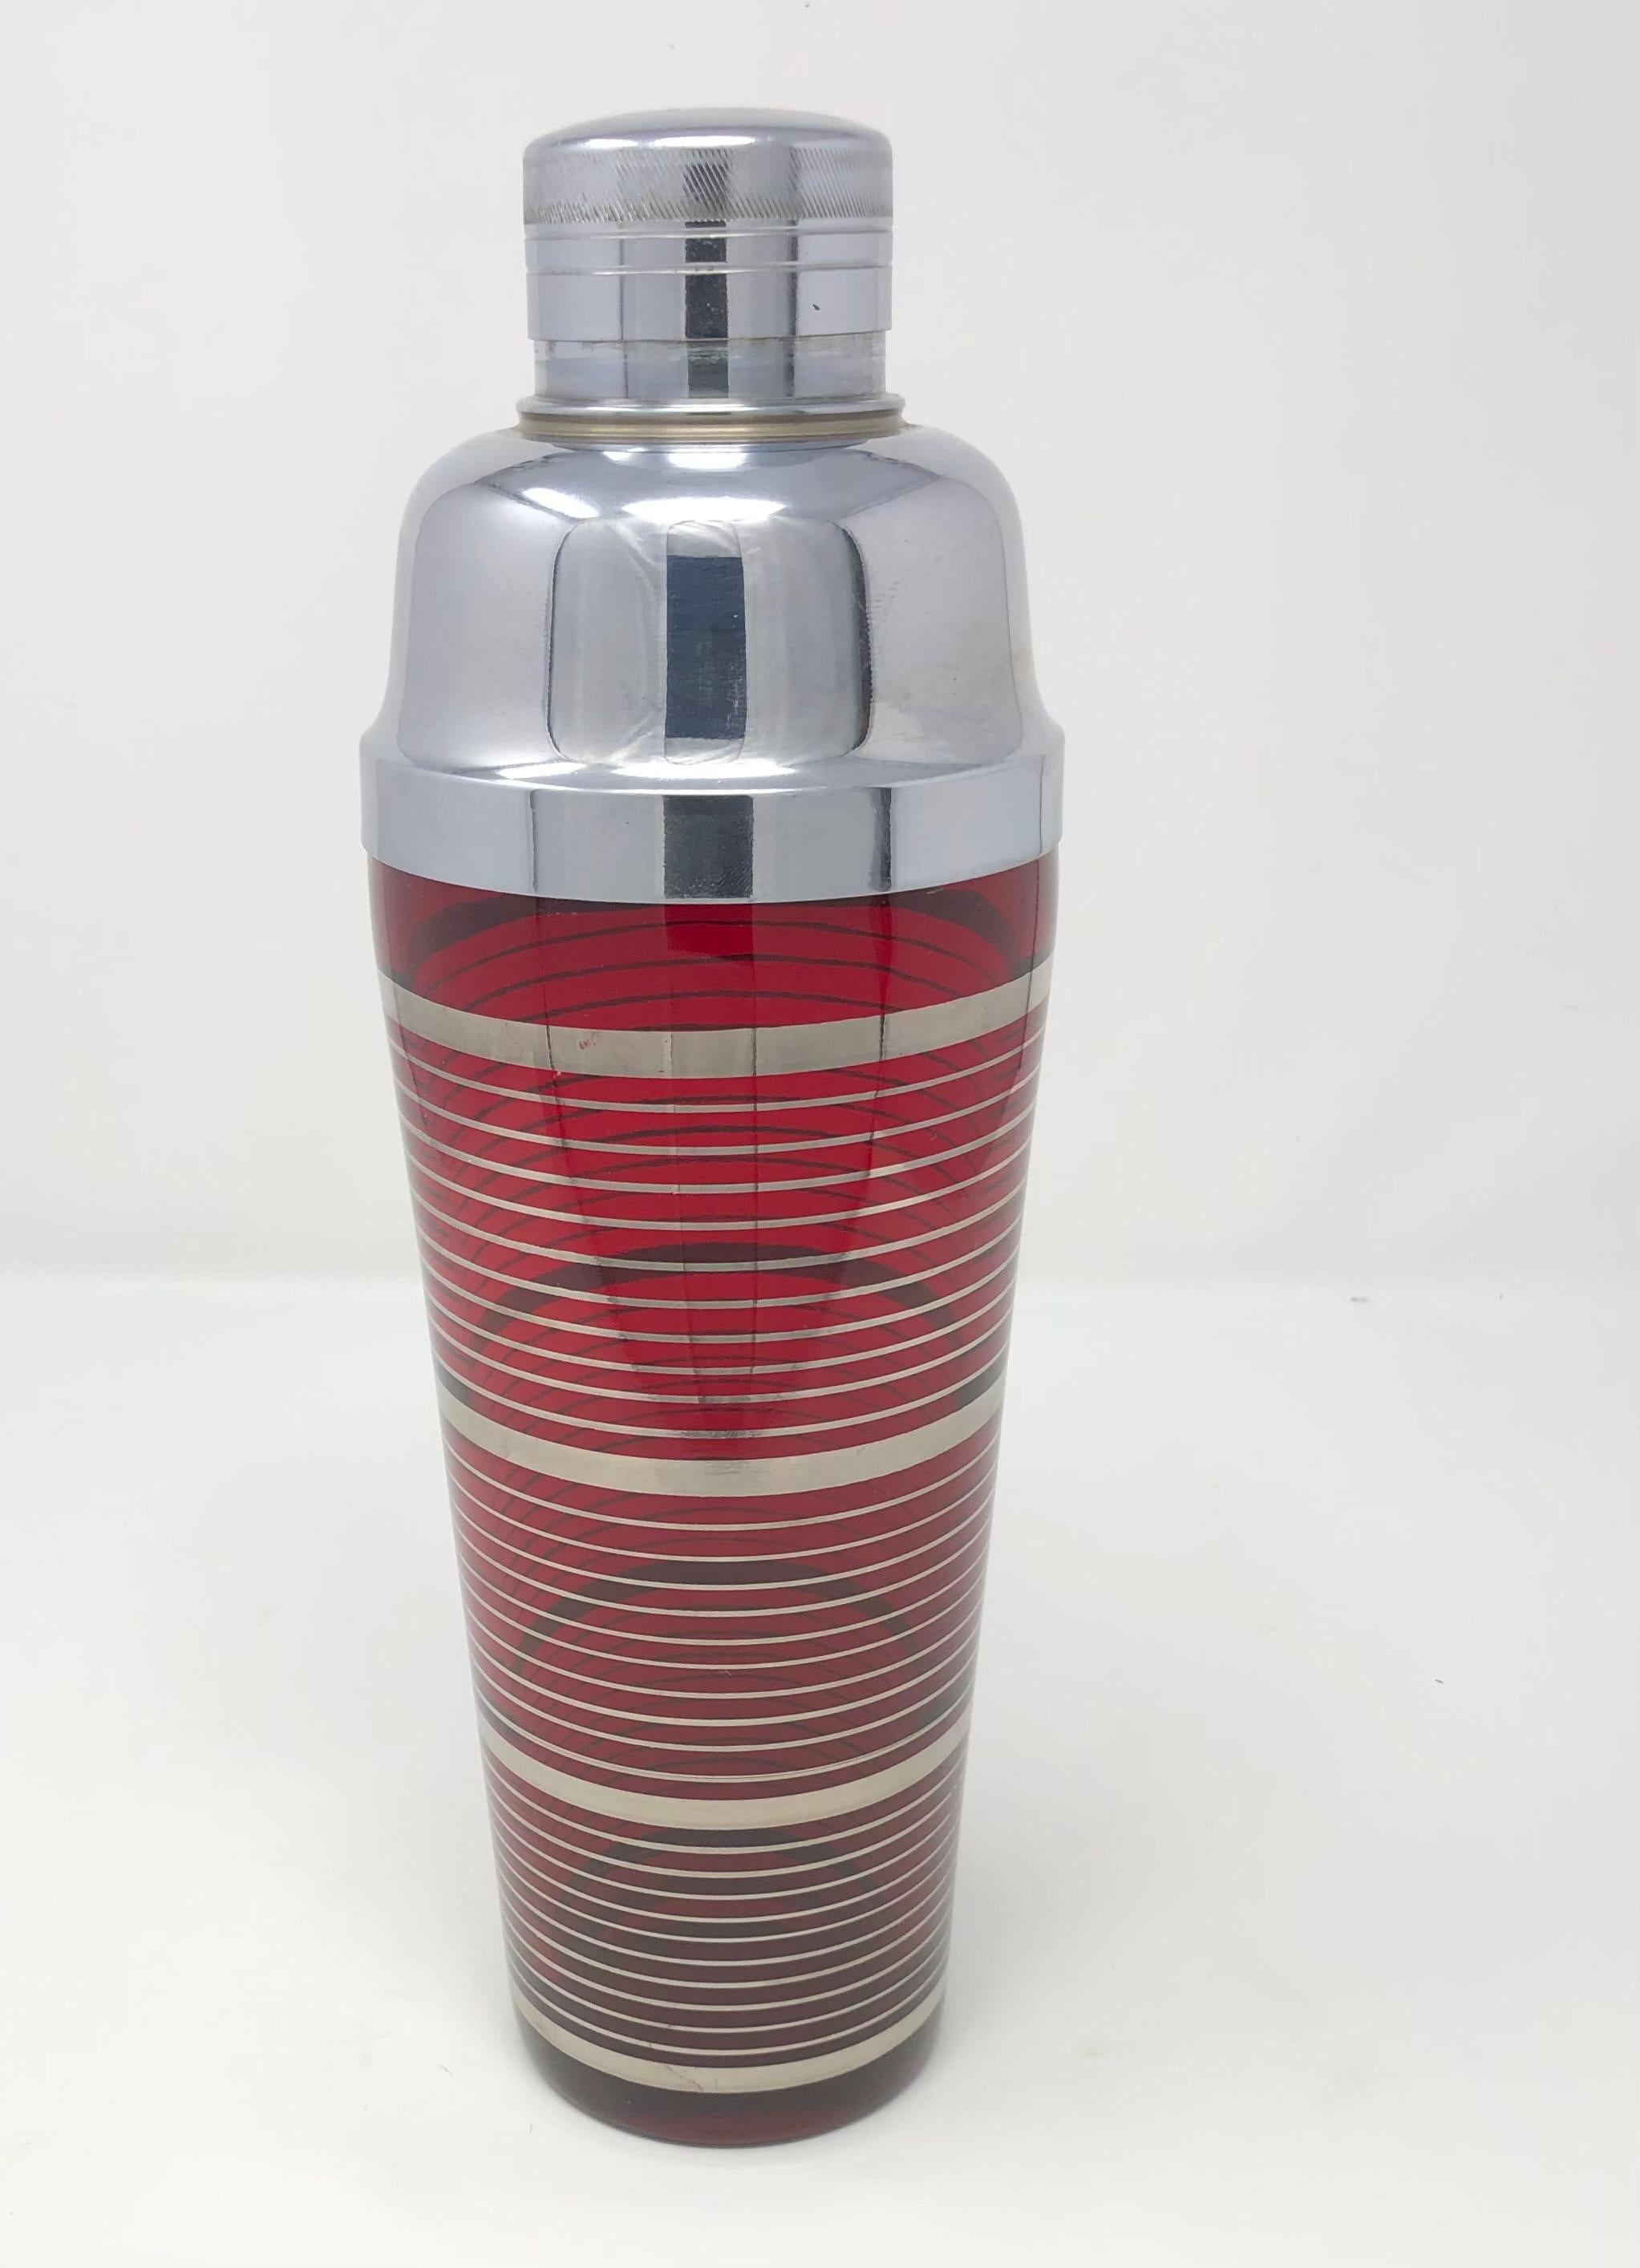 Art Deco Ruby Red Cocktail Shaker With Silver Bands And Chrome Lid For Sale 3